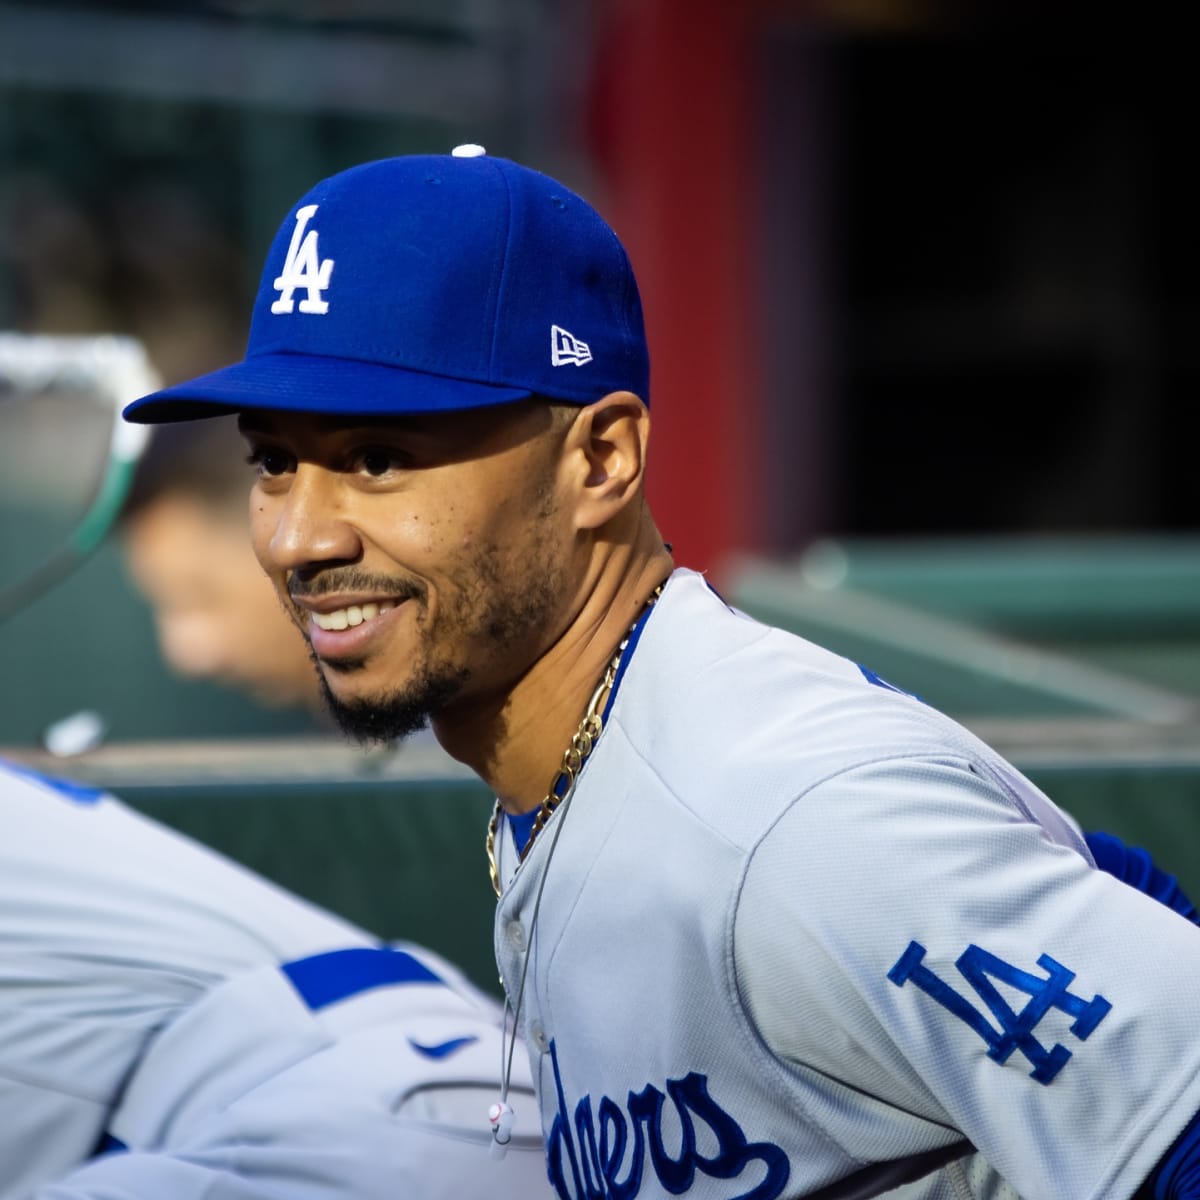 Mookie Betts likely to see more time at second base for Dodgers